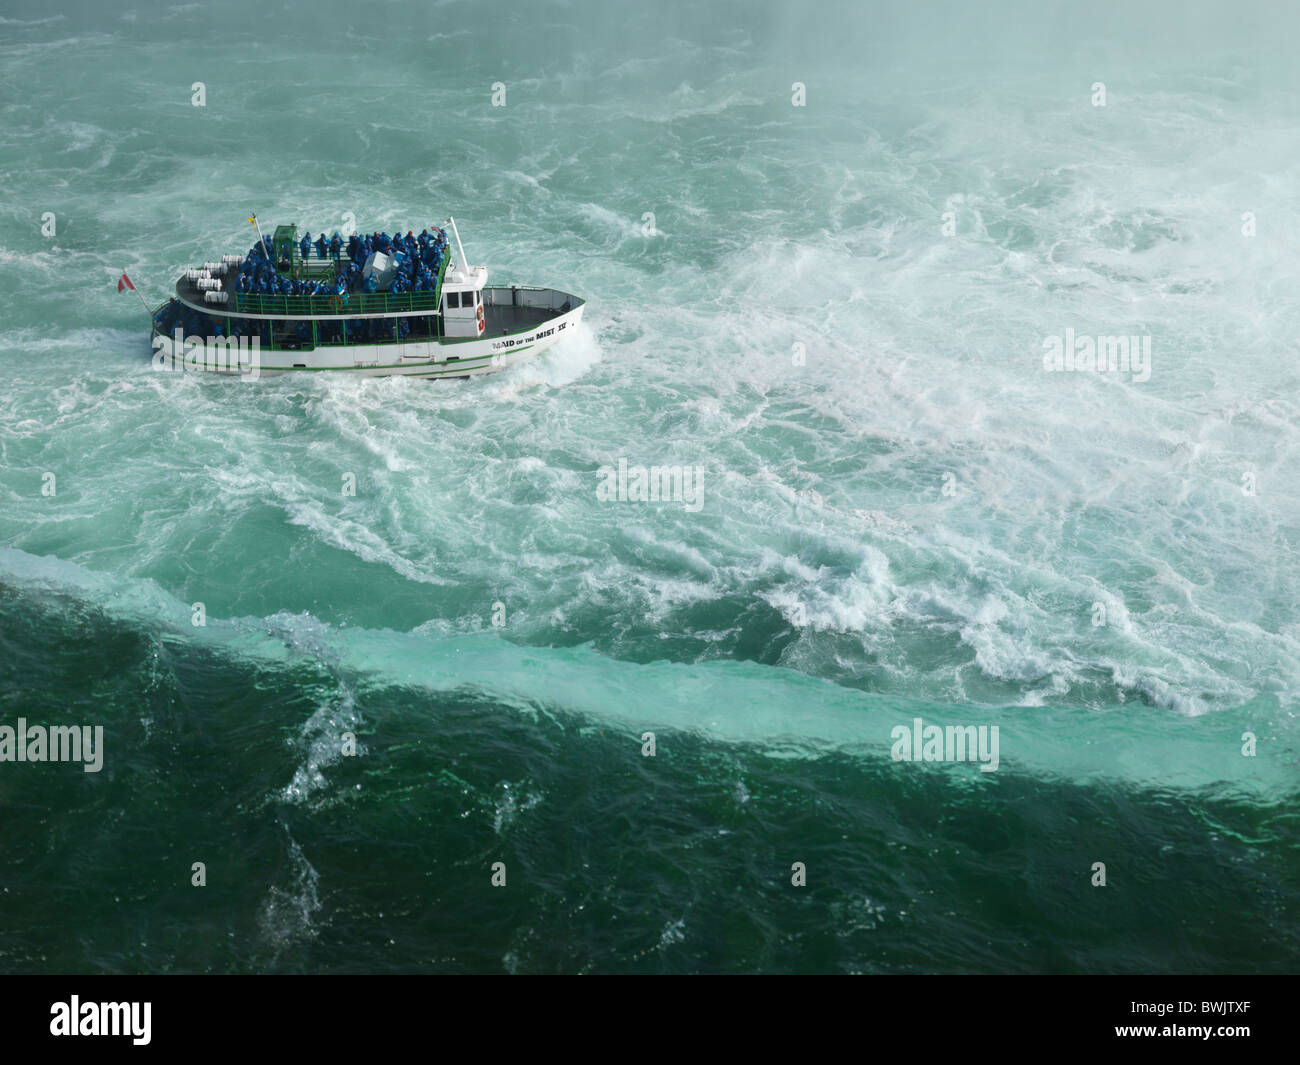 People on Made of the Mist boat ride approaching Niagara Falls Horseshoe edge Stock Photo